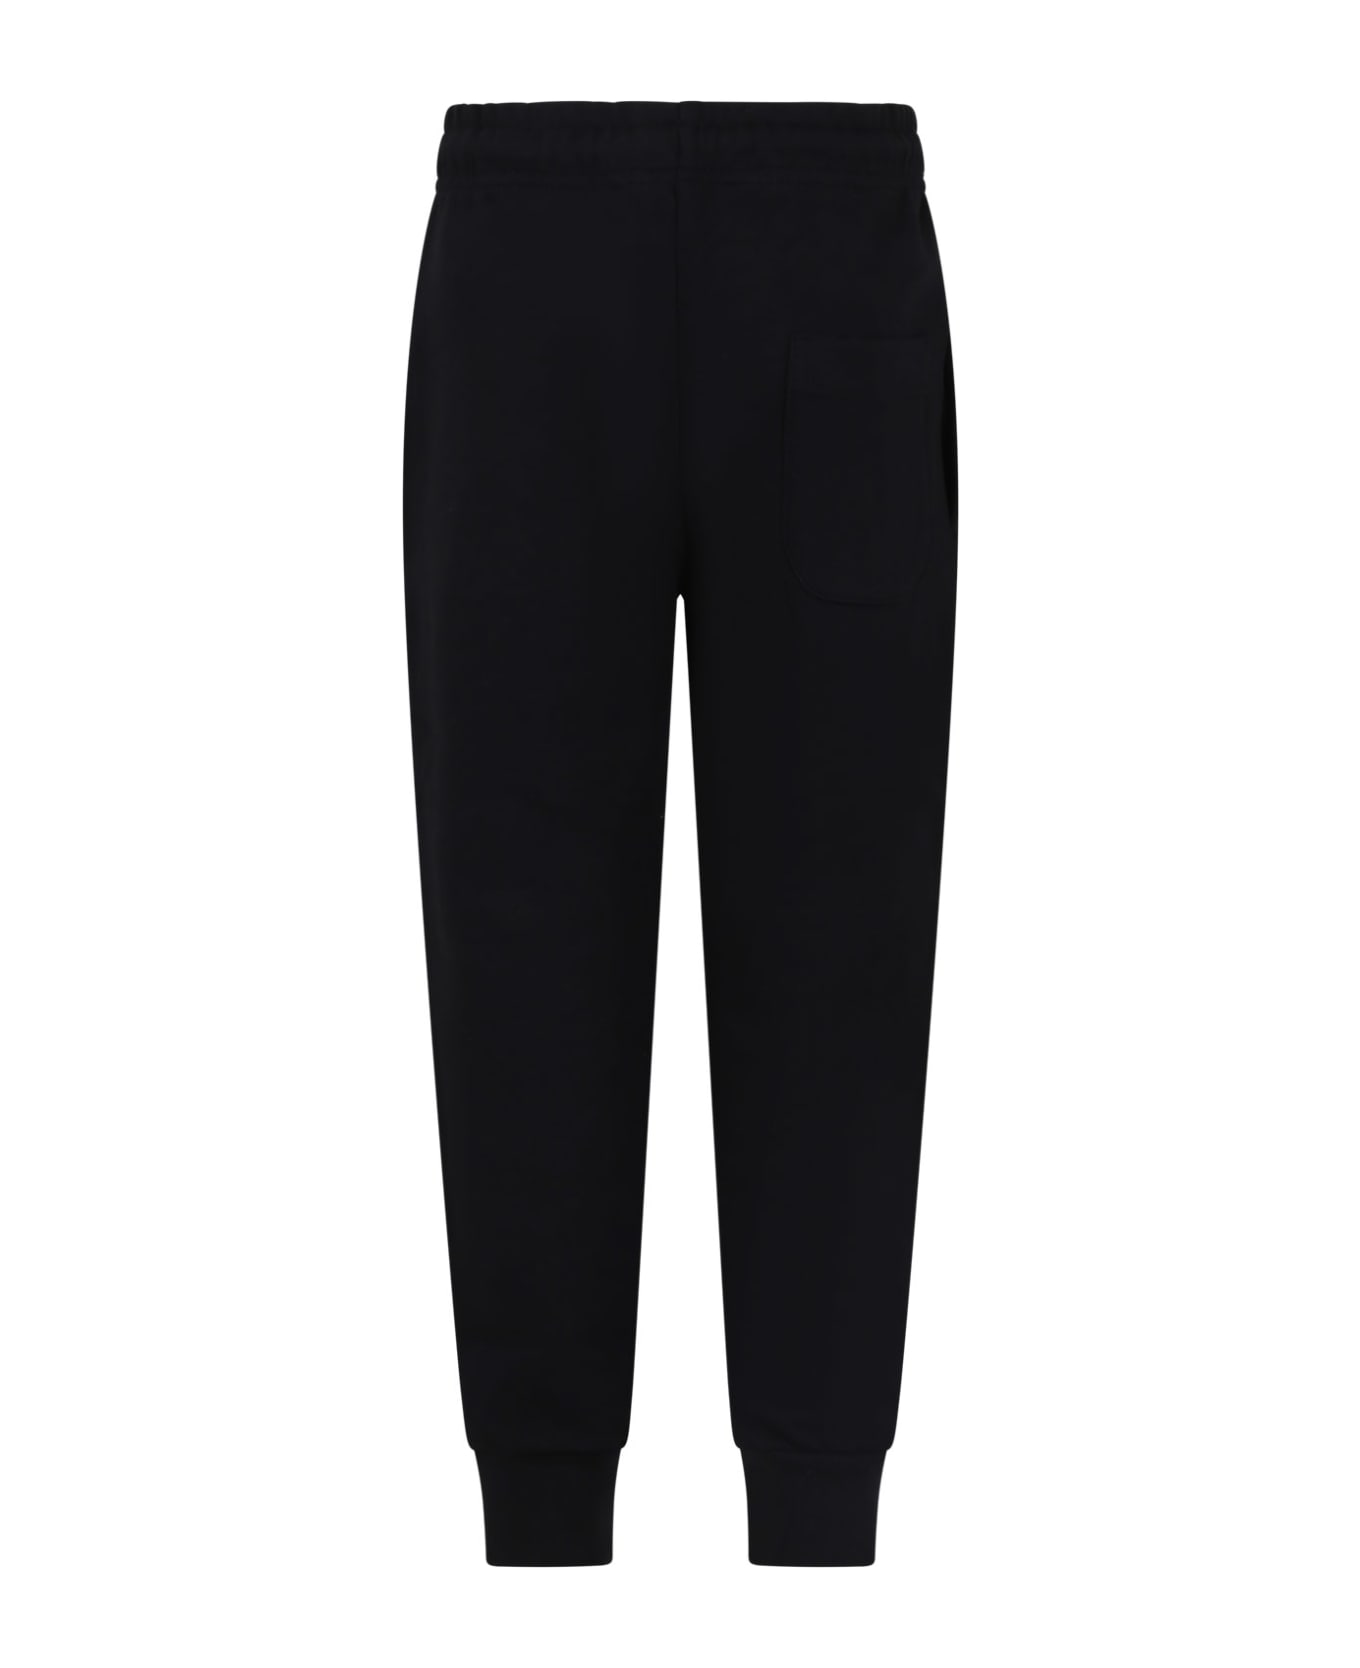 MSGM Black Trousers For Kids With Logo - Black